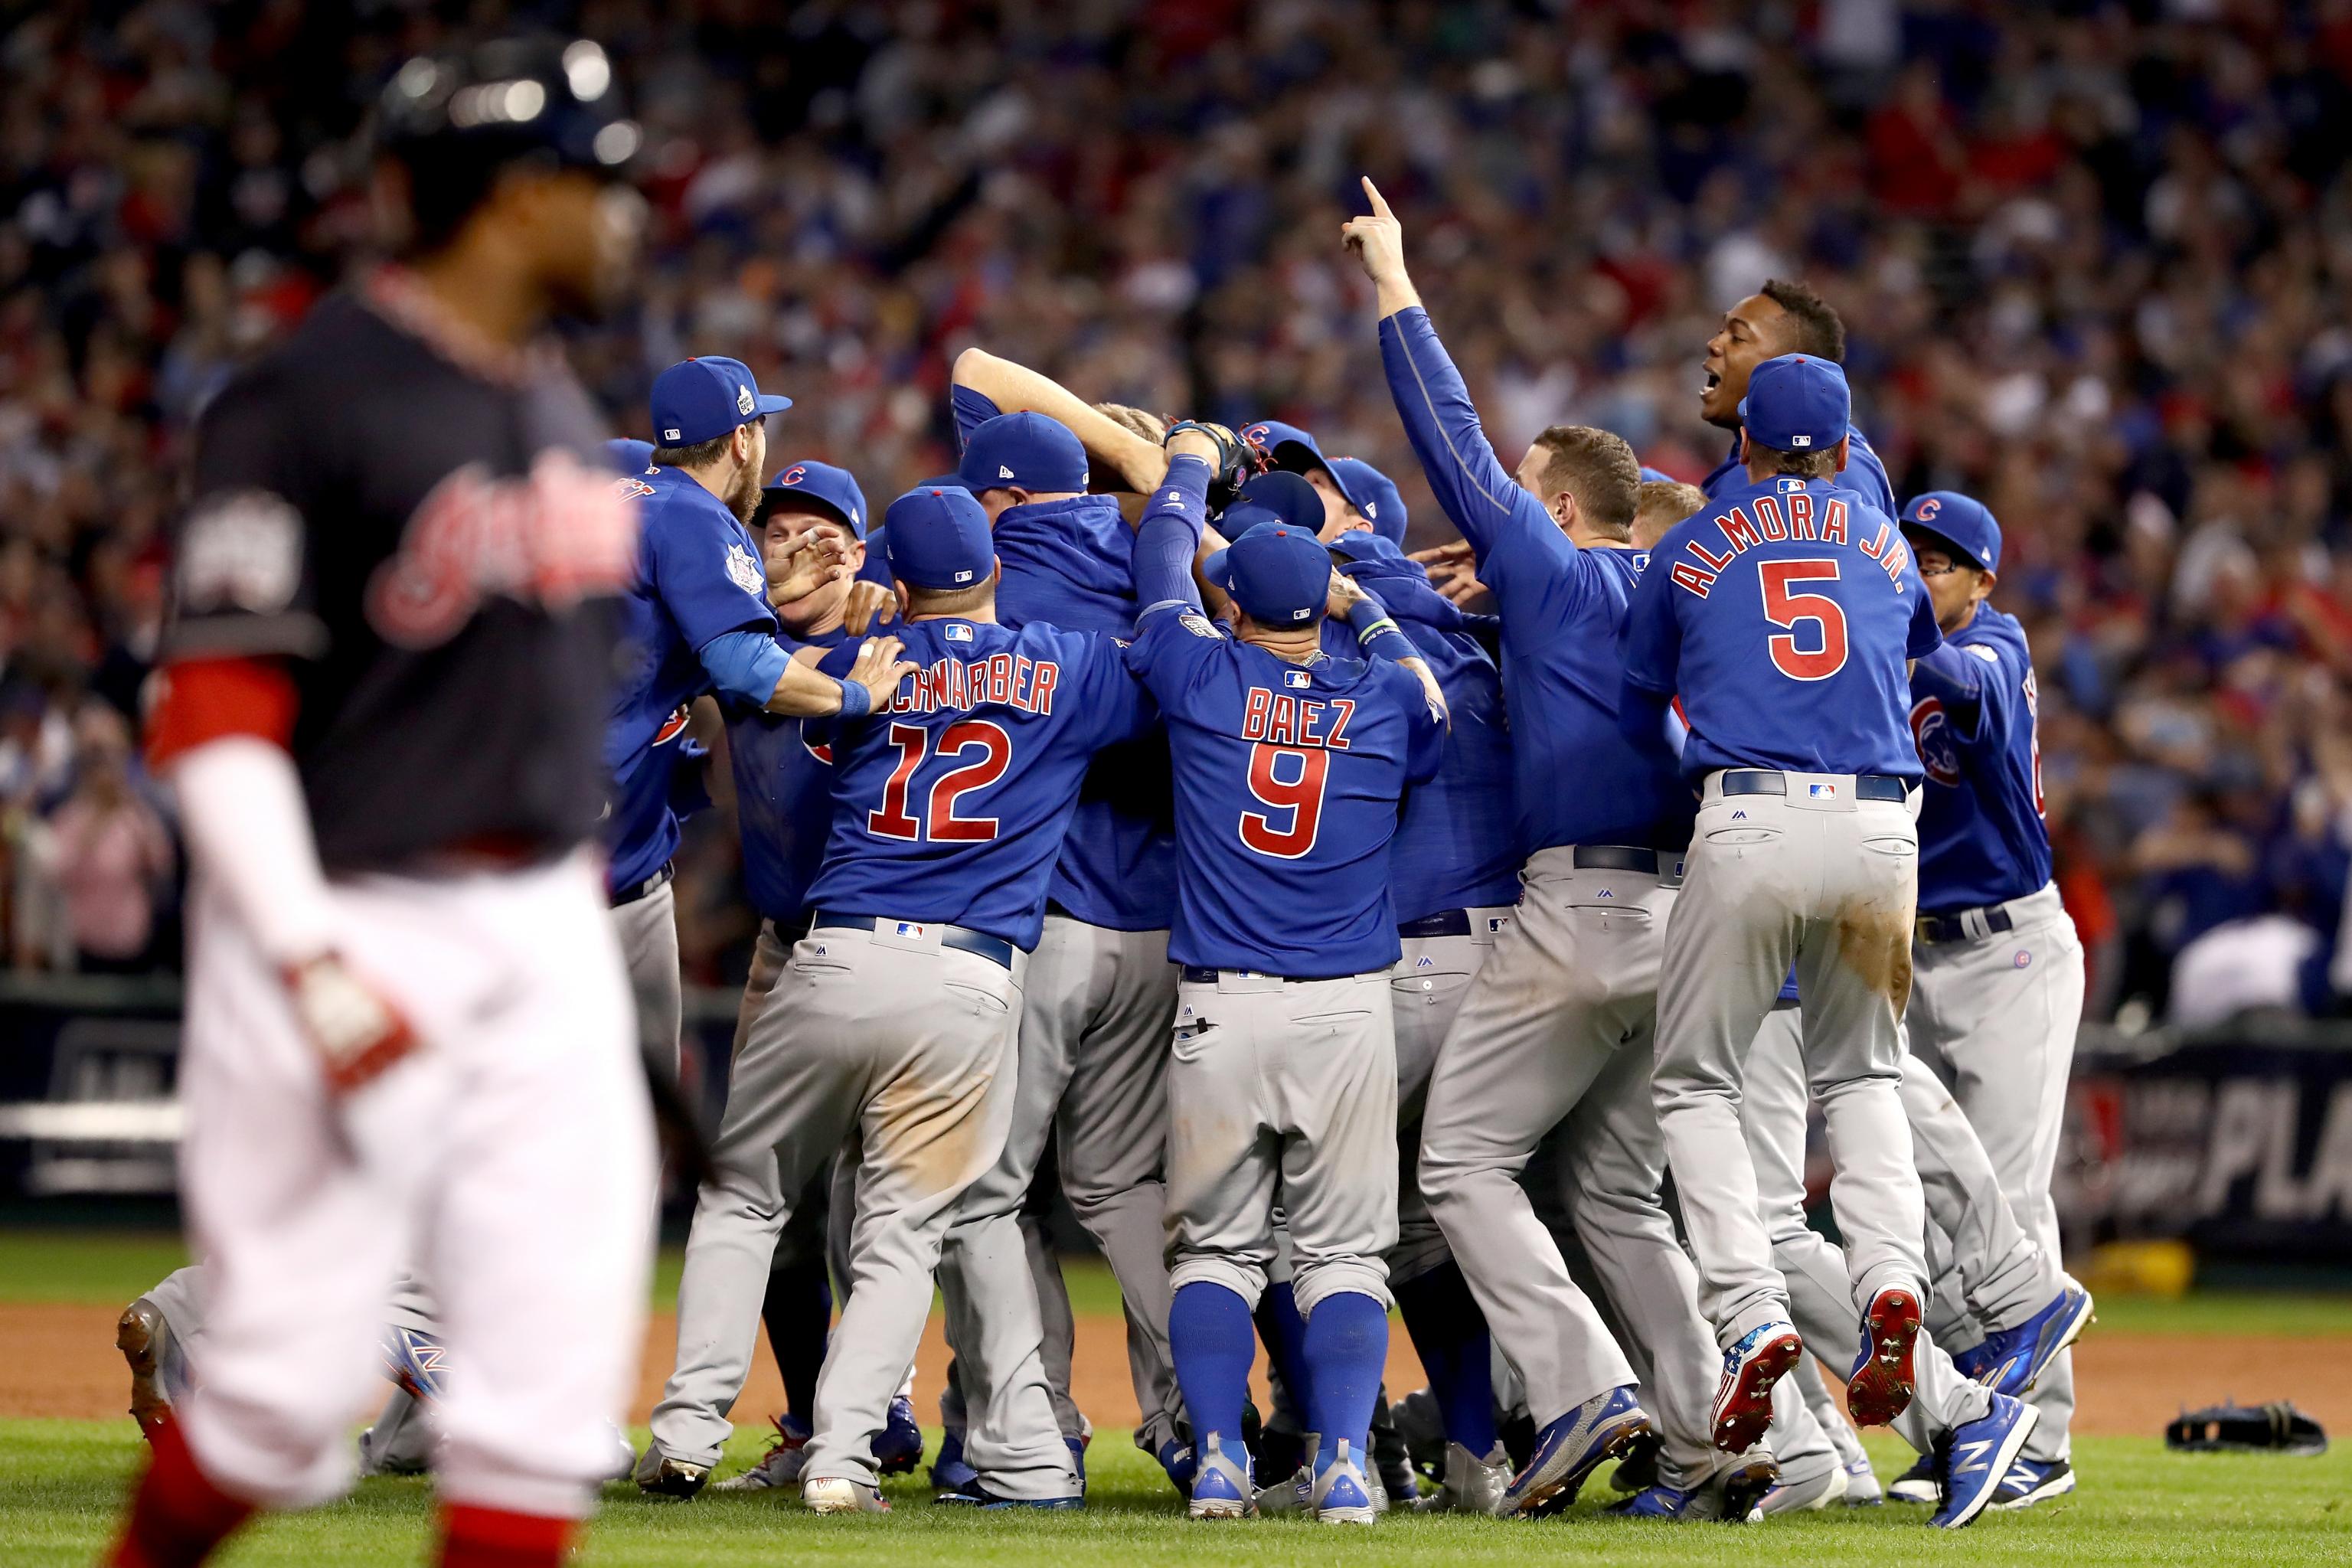 Lovable losers no more: Cubs win World Series in 10th inning